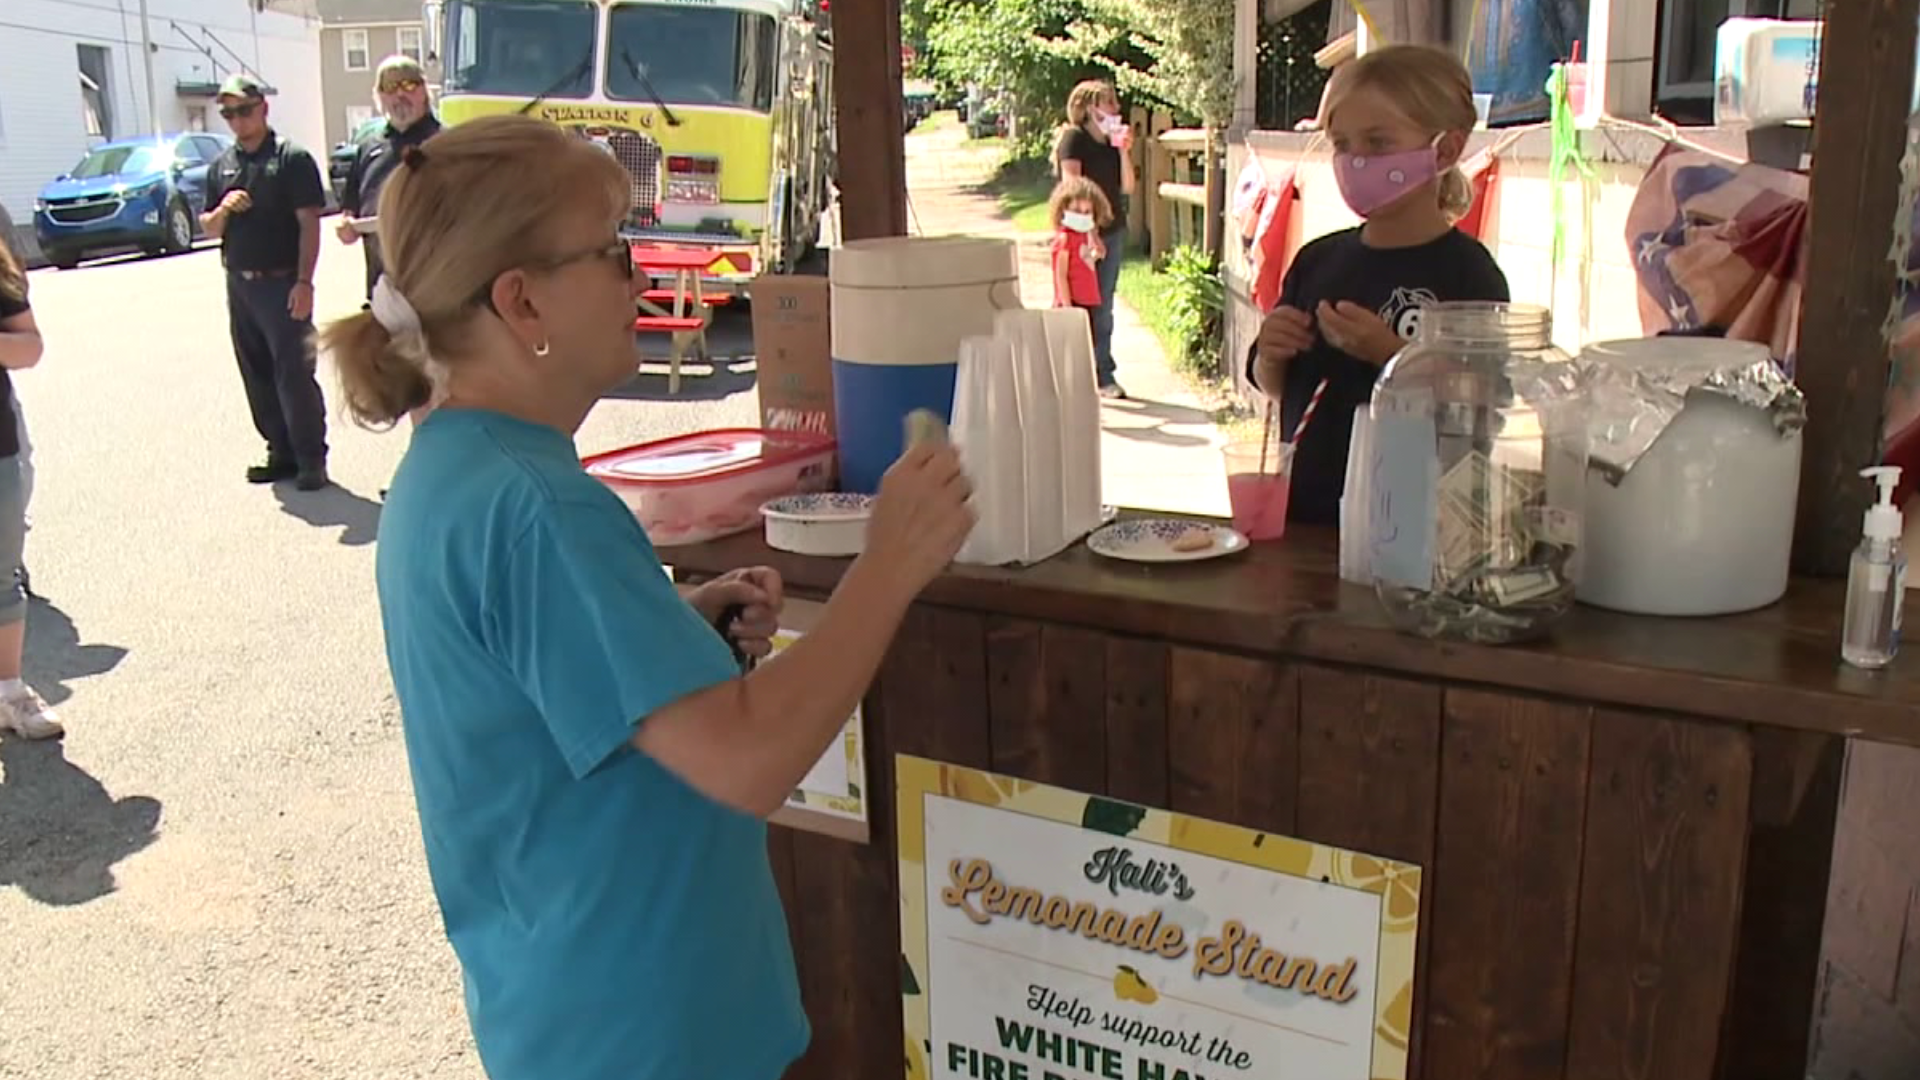 Kali's Lemonade Stand raised more than $1,000 for the White Haven Fire Department.